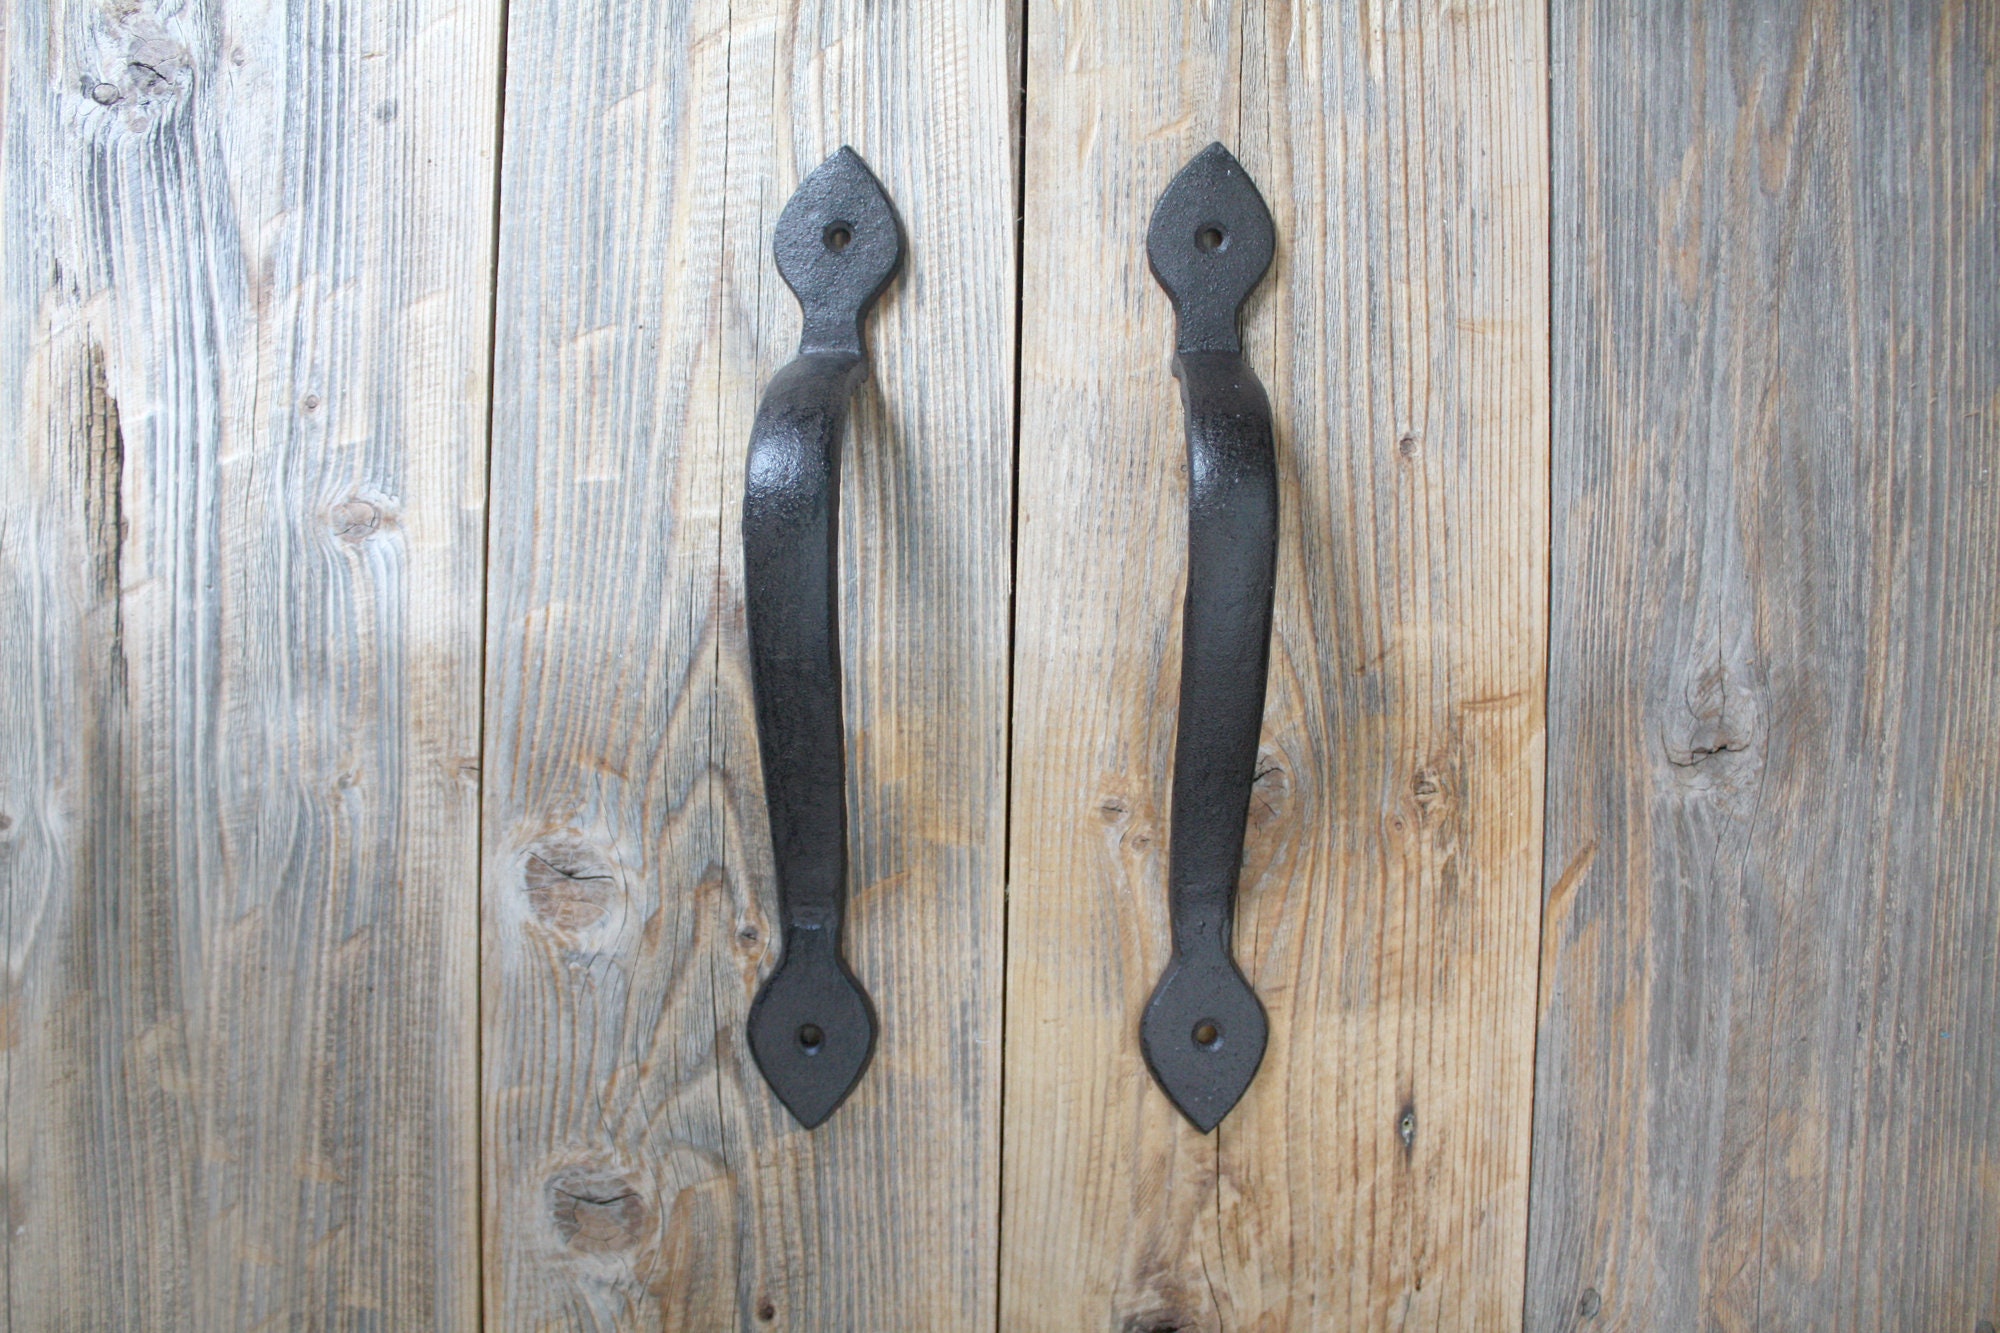 Lot of 4 New Rustic 5.5" Cast Iron Classic Gate Pulls Handles Barn Shed 